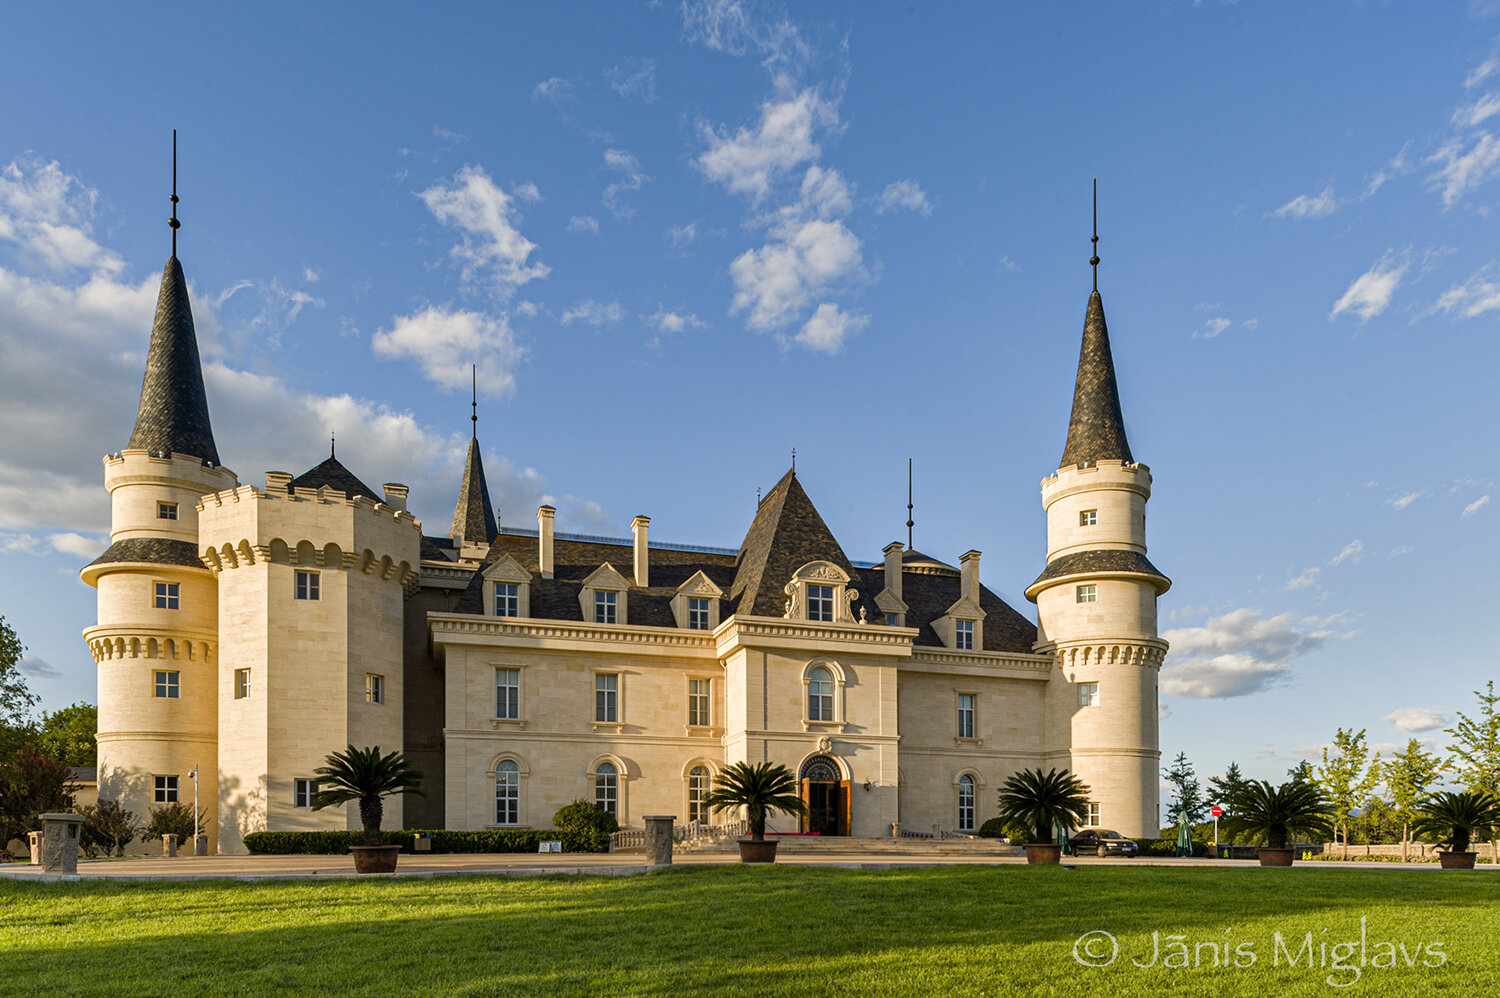 Castle-like winery and tasting room at Chateau Changyu AFIP.